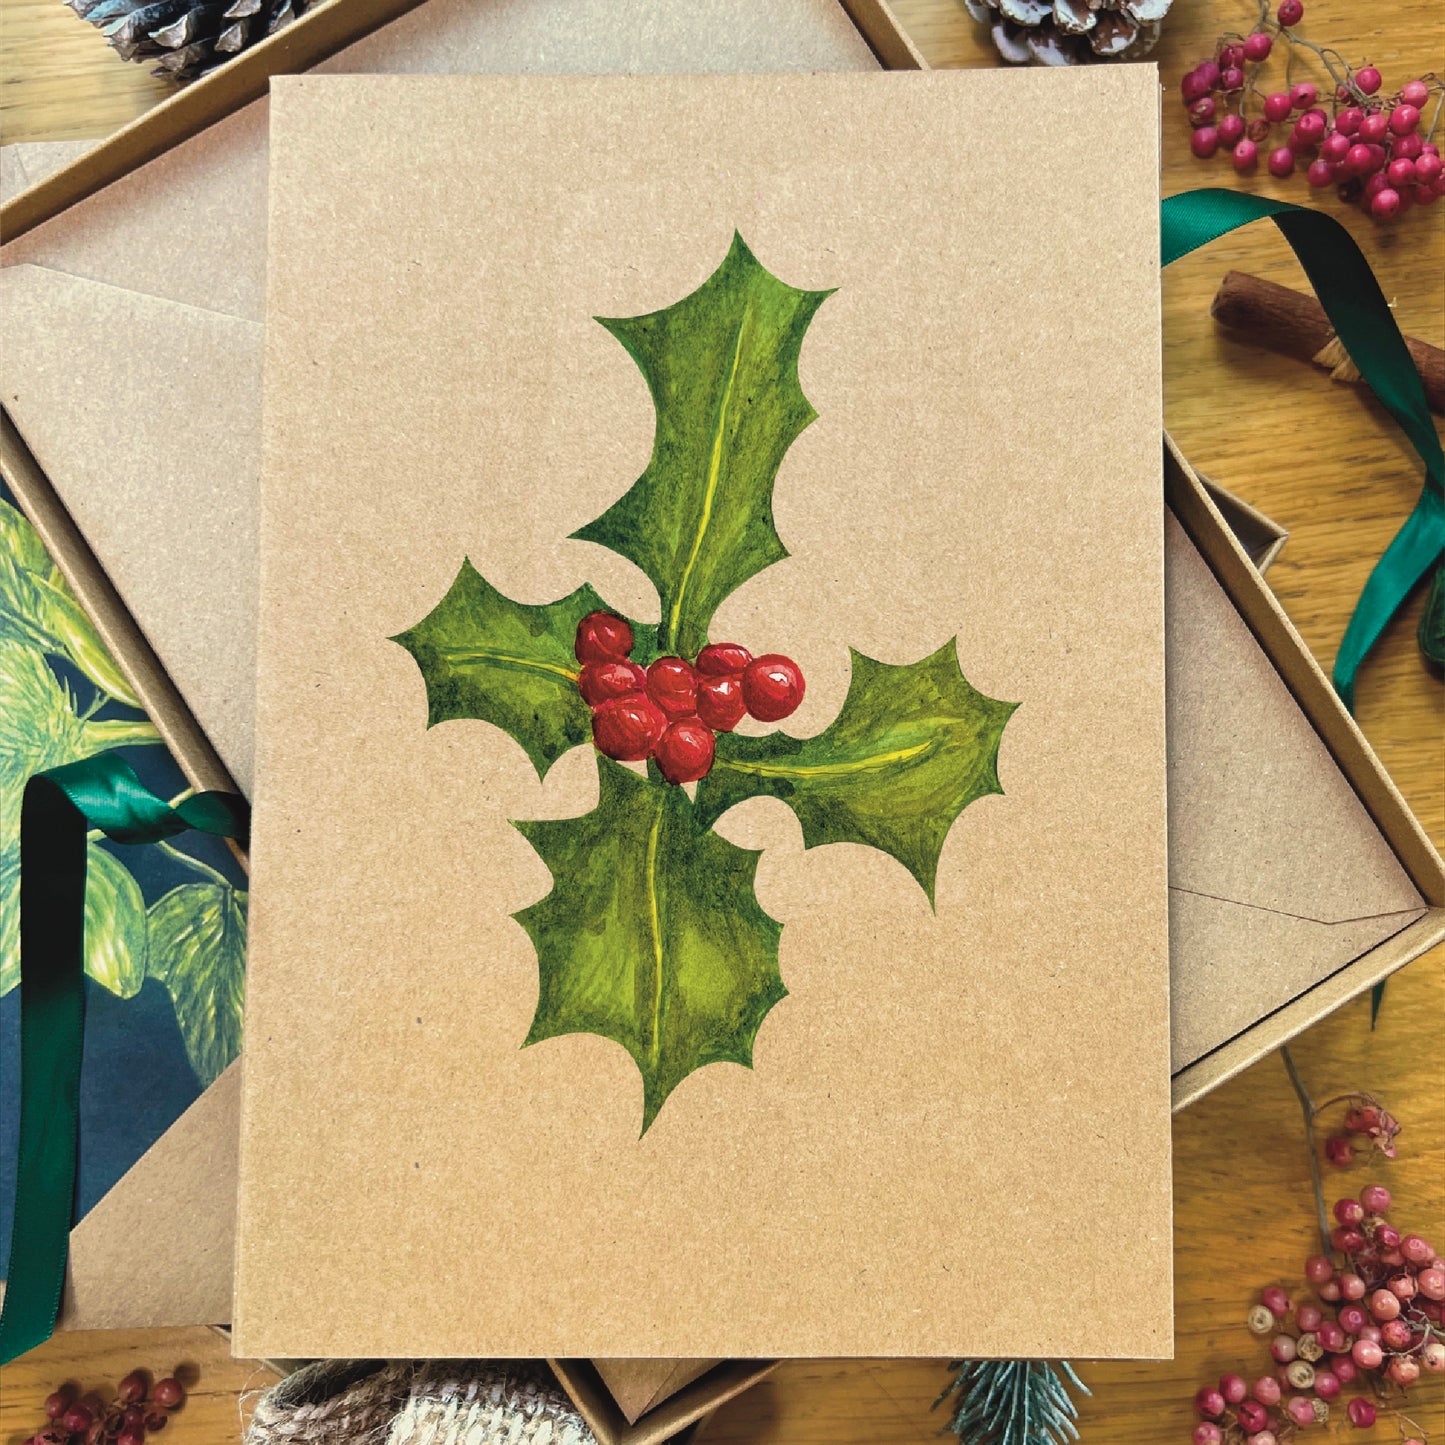 English Holly sprig with berries illustrated in watercolour attached to brown Manila recycled greetings card on a wooden desk